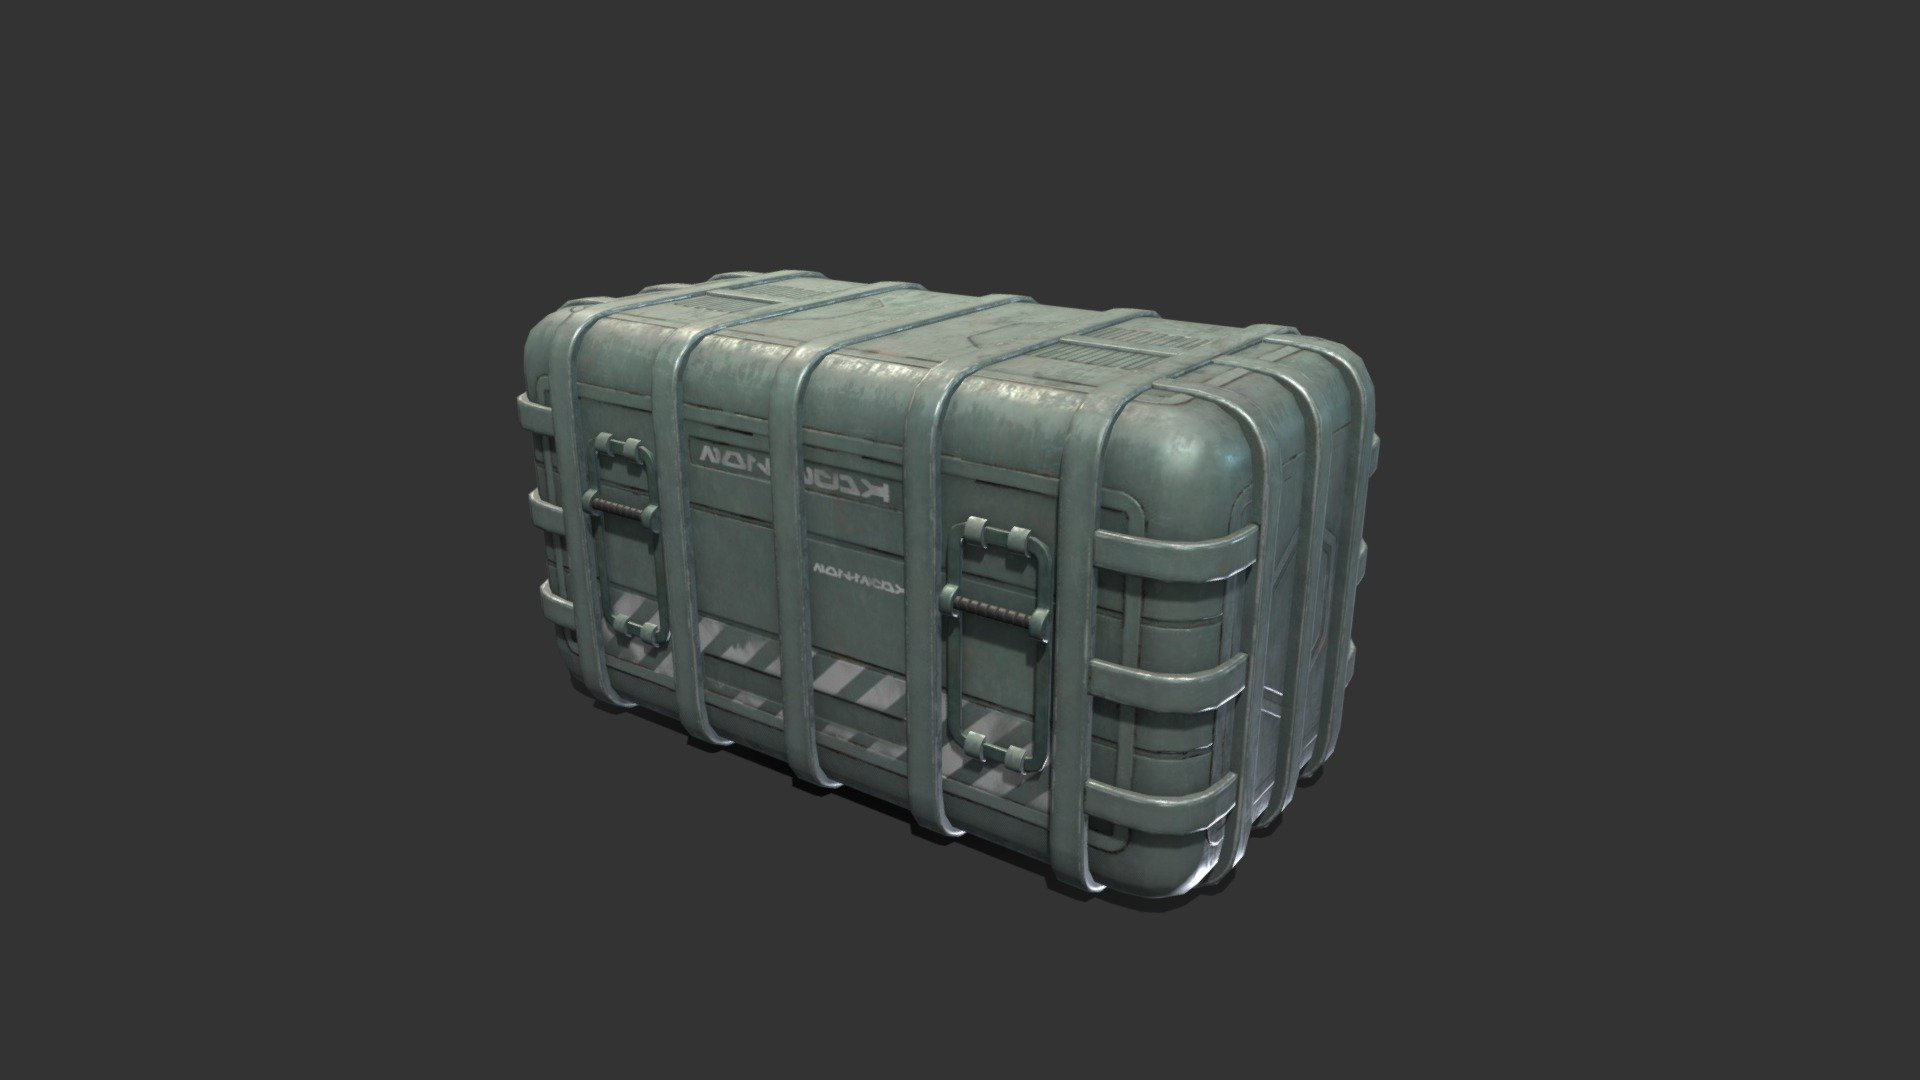 Star wars Imperial Based Amunition Crate
Realistic 2K PBR textures.
For SetDressing a StarWars Environment 3d model